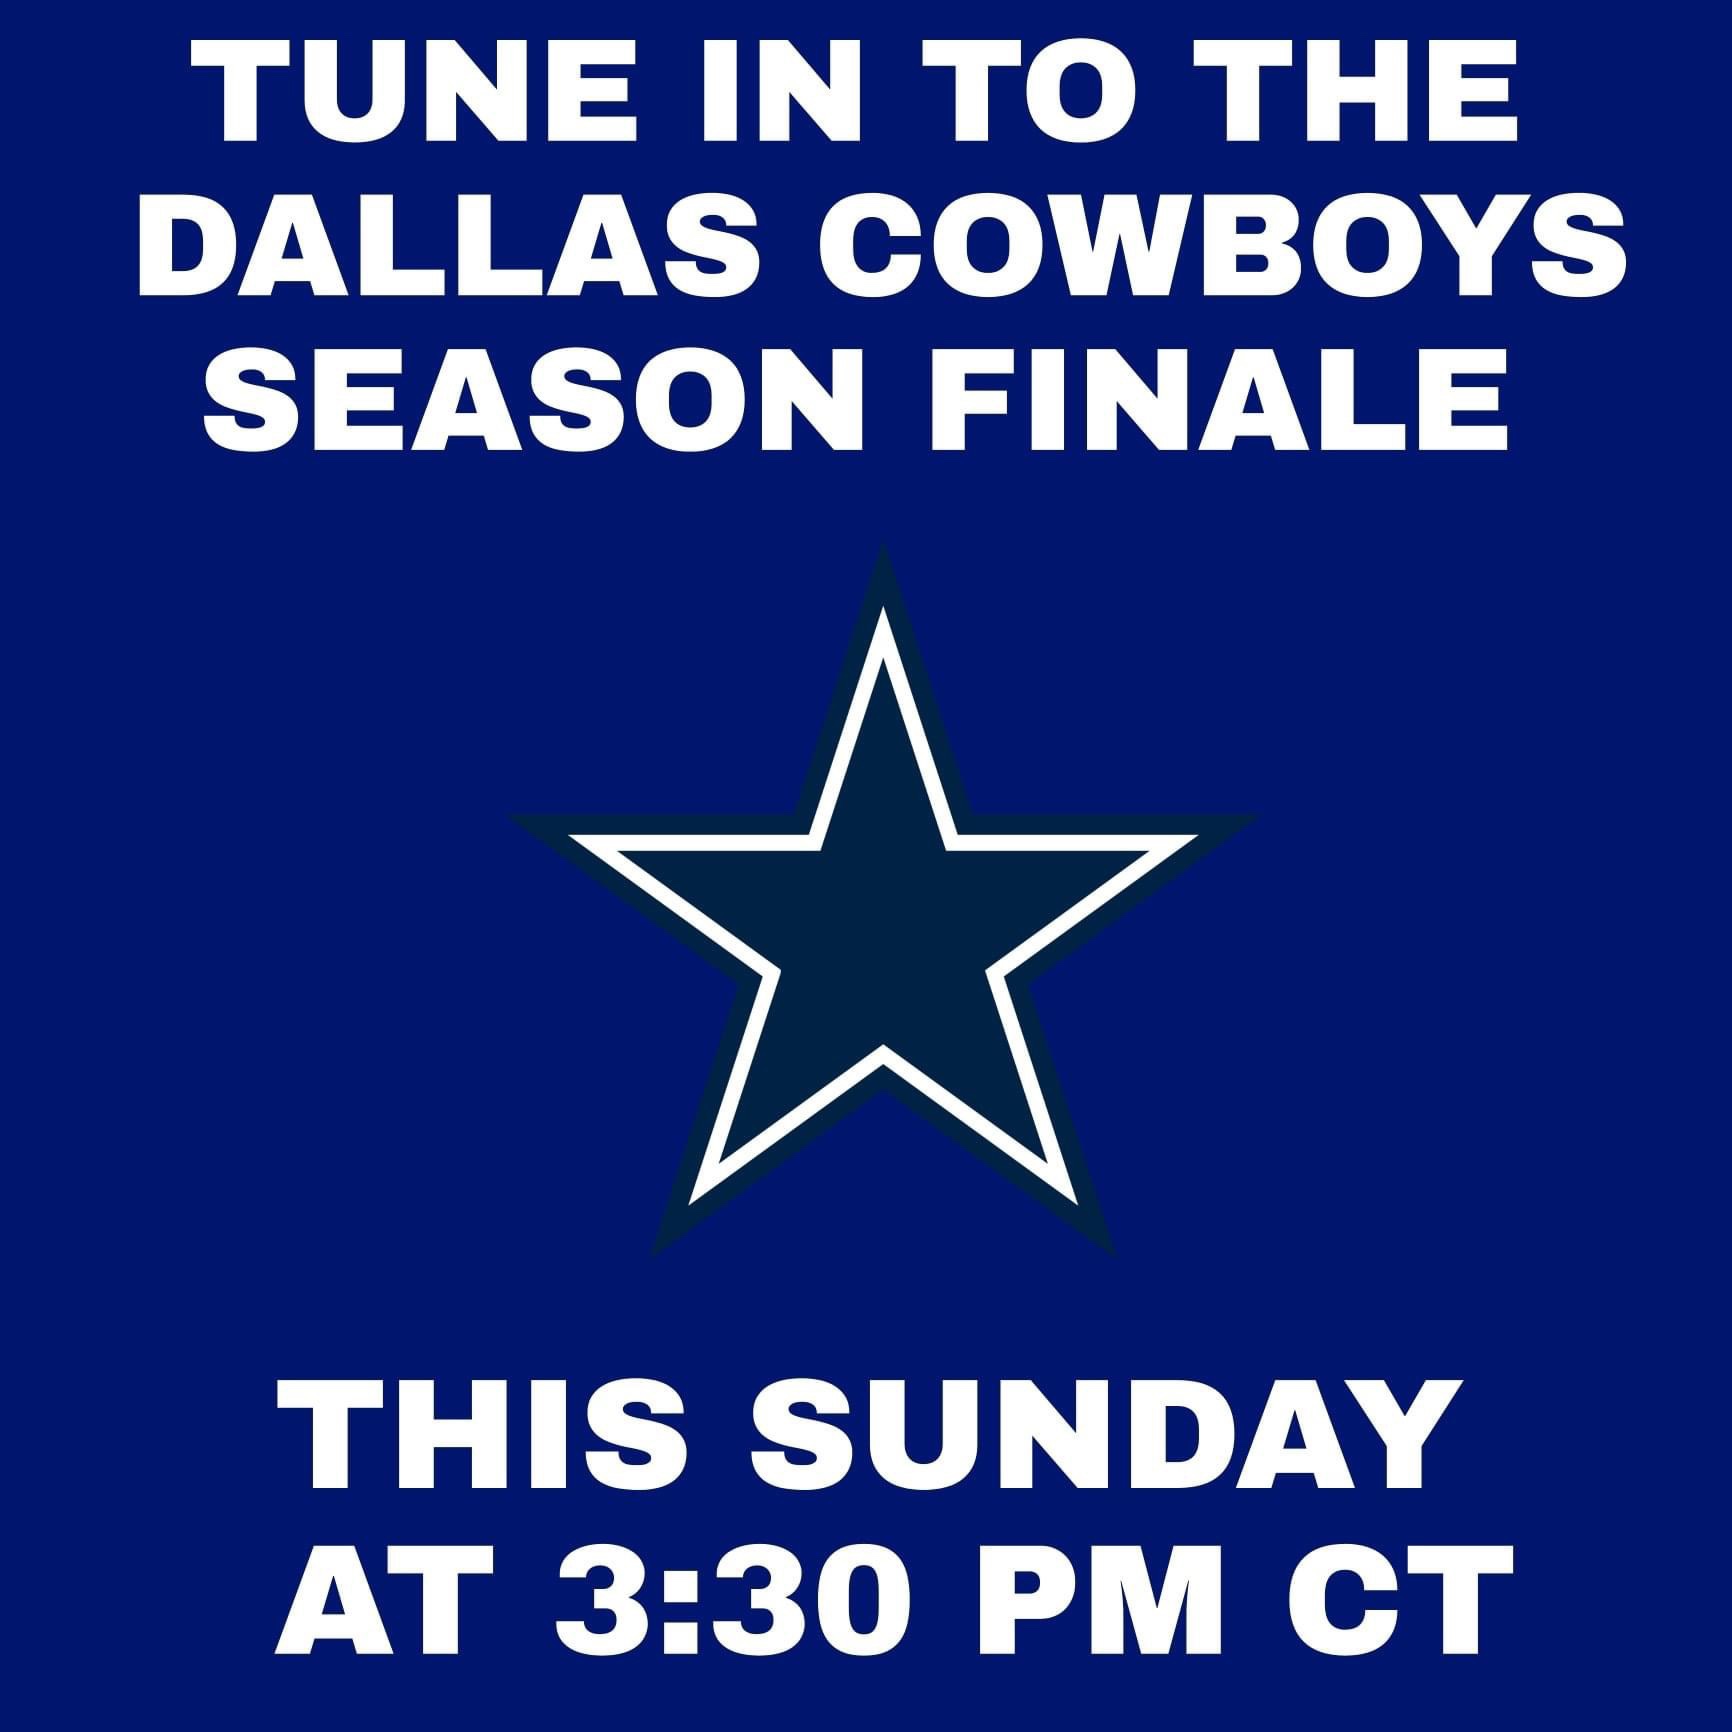 Tune in to the Dallas Cowboys season finale this Sunday at 3:30 PM CT meme